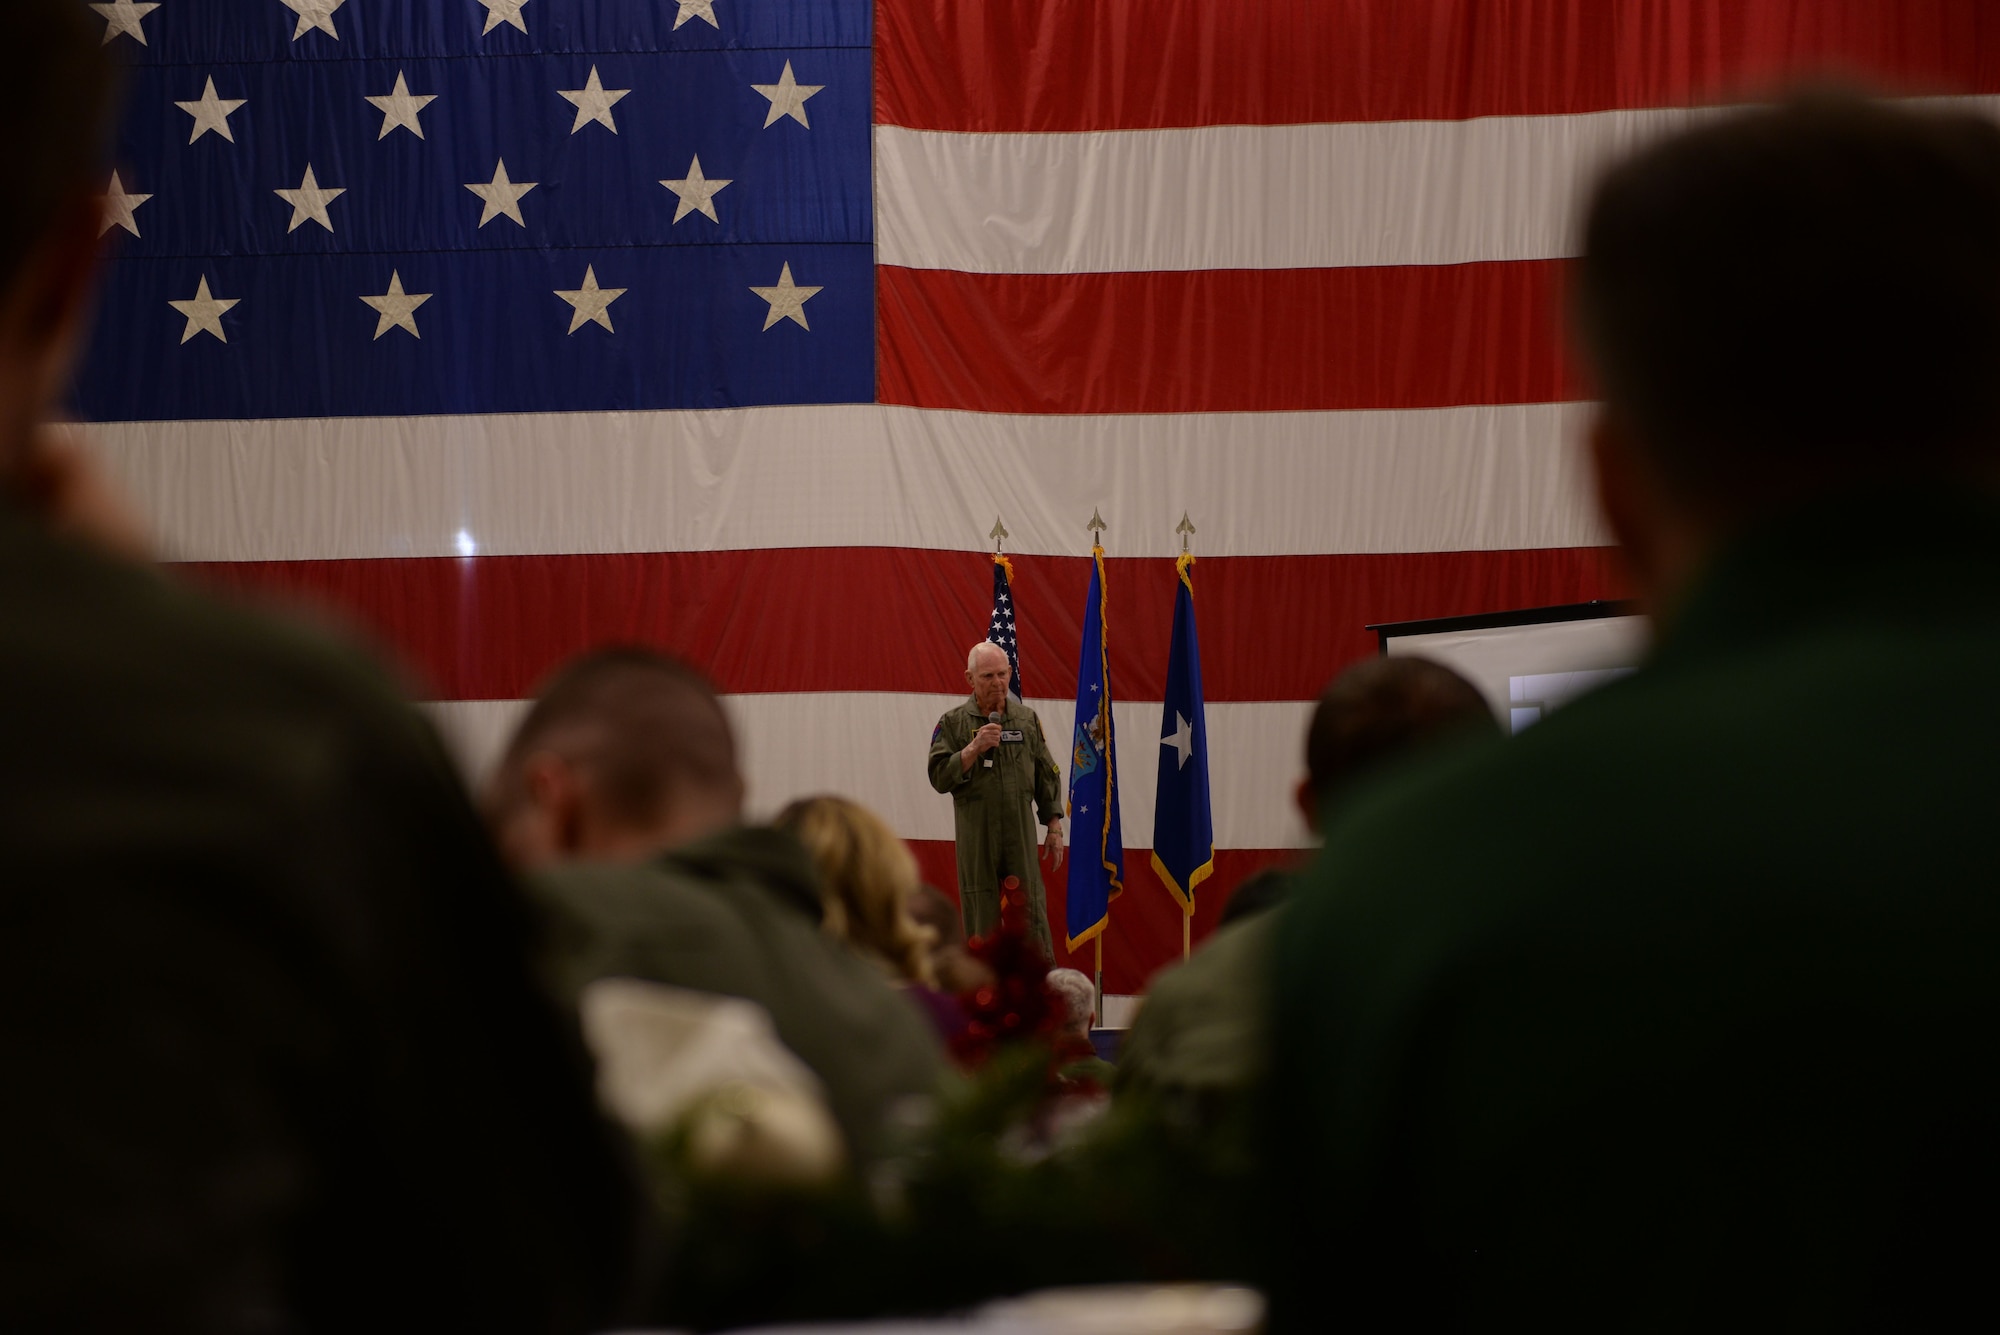 Retired Air Force pilot Lt. Col. Bob Pardo speaks to a group of graduating 310th Fighter Squadron F-16 Basic Course pilots and their friends and families at Luke Air Force Base, Ariz., Dec. 13, 2017. Pardo famously prevented the capture of another aircrew by using his aircraft to push their damaged jet into friendly airspace during the Vietnam War in what came to be known as “Pardo's Push.” (U.S. Air Force photo/Senior Airman Ridge Shan)